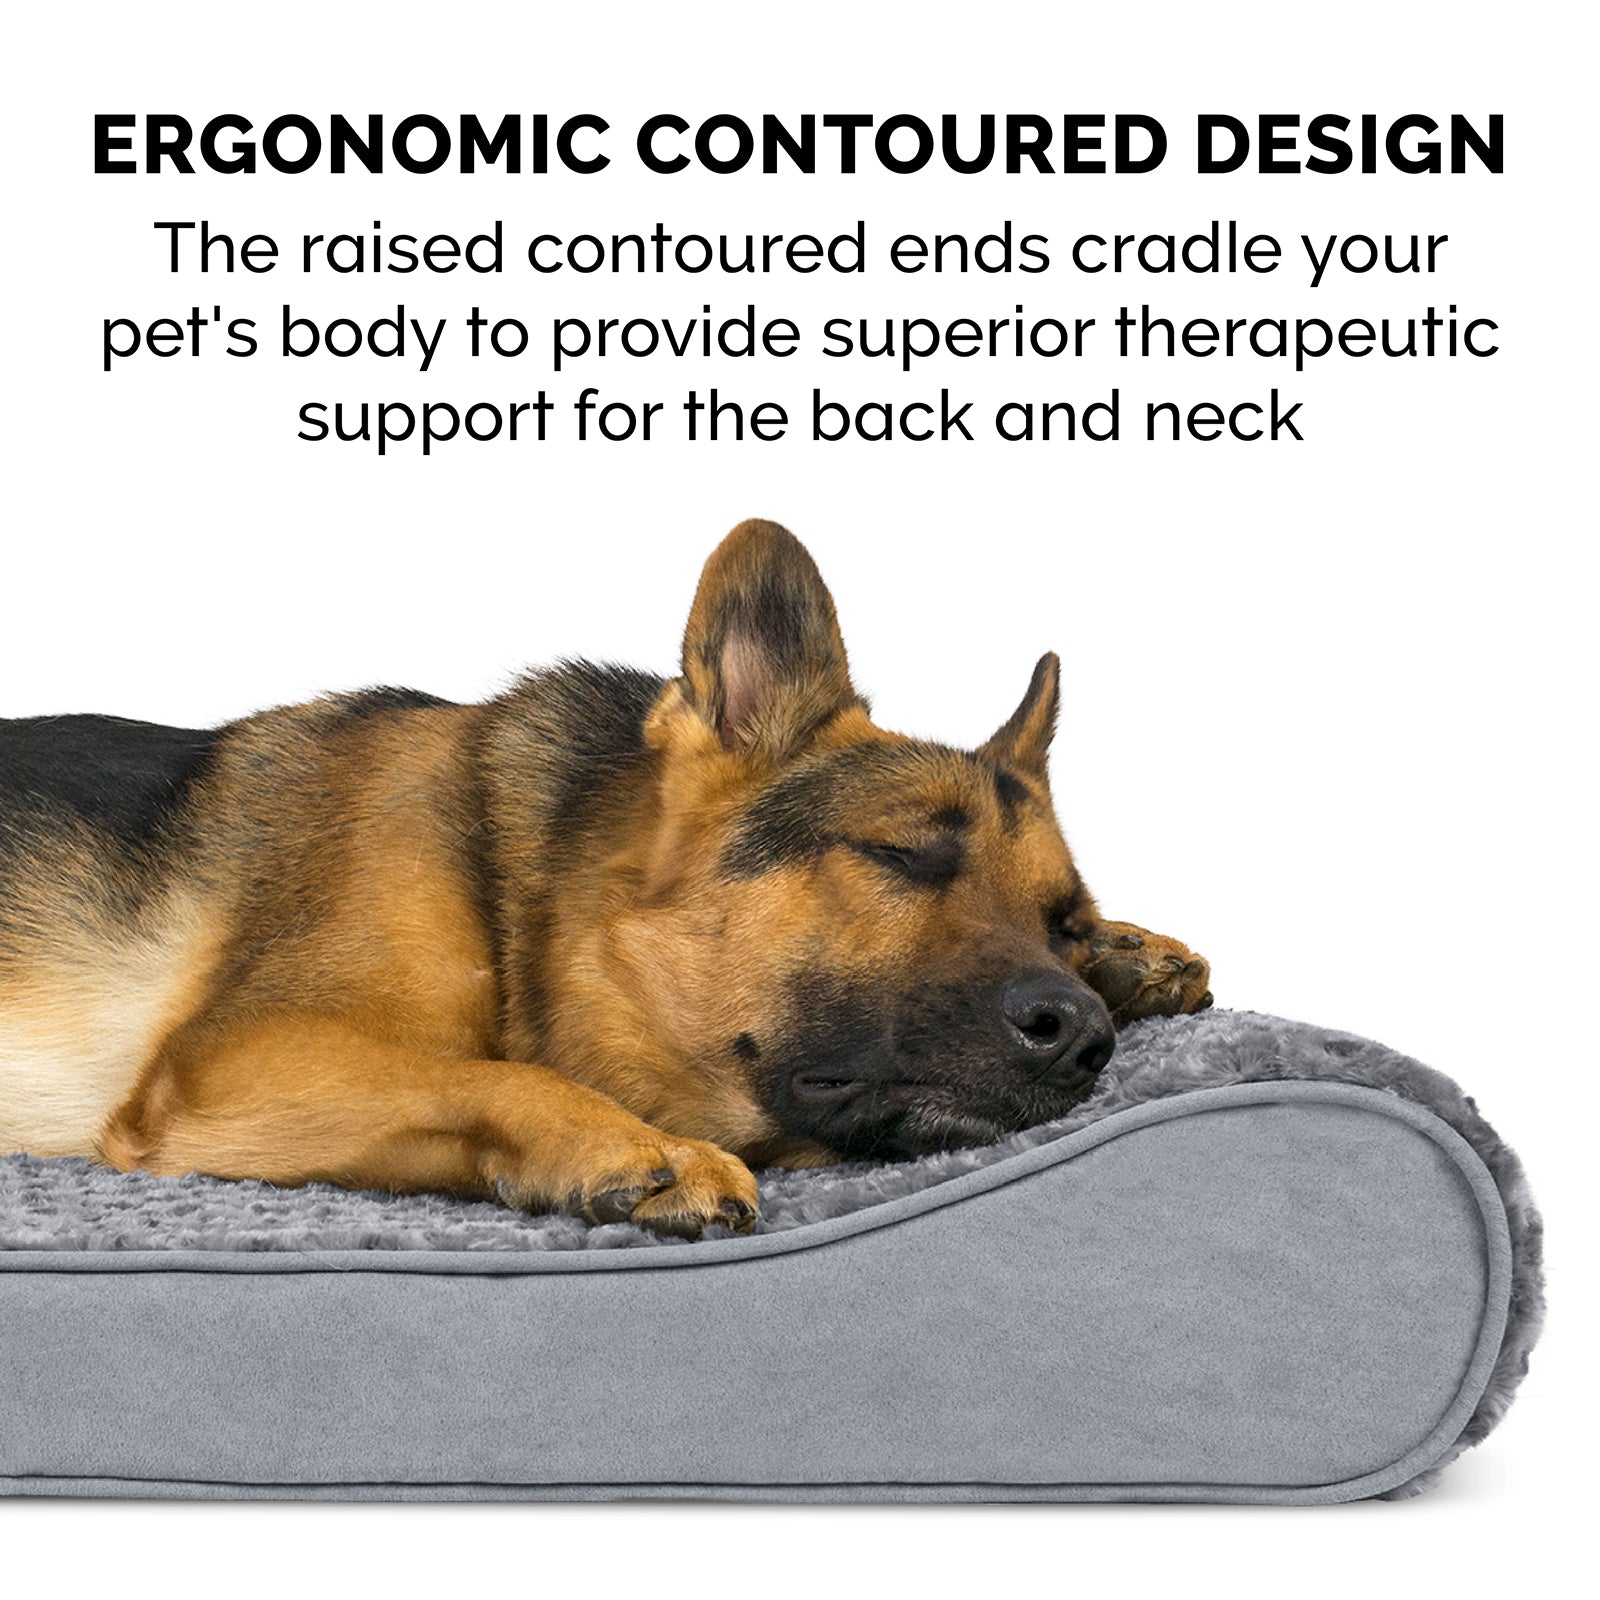 FurHaven Pet Dog Bed | Orthopedic Ultra Plush Luxe Lounger Pet Bed for Dogs and Cats， Gray， Jumbo